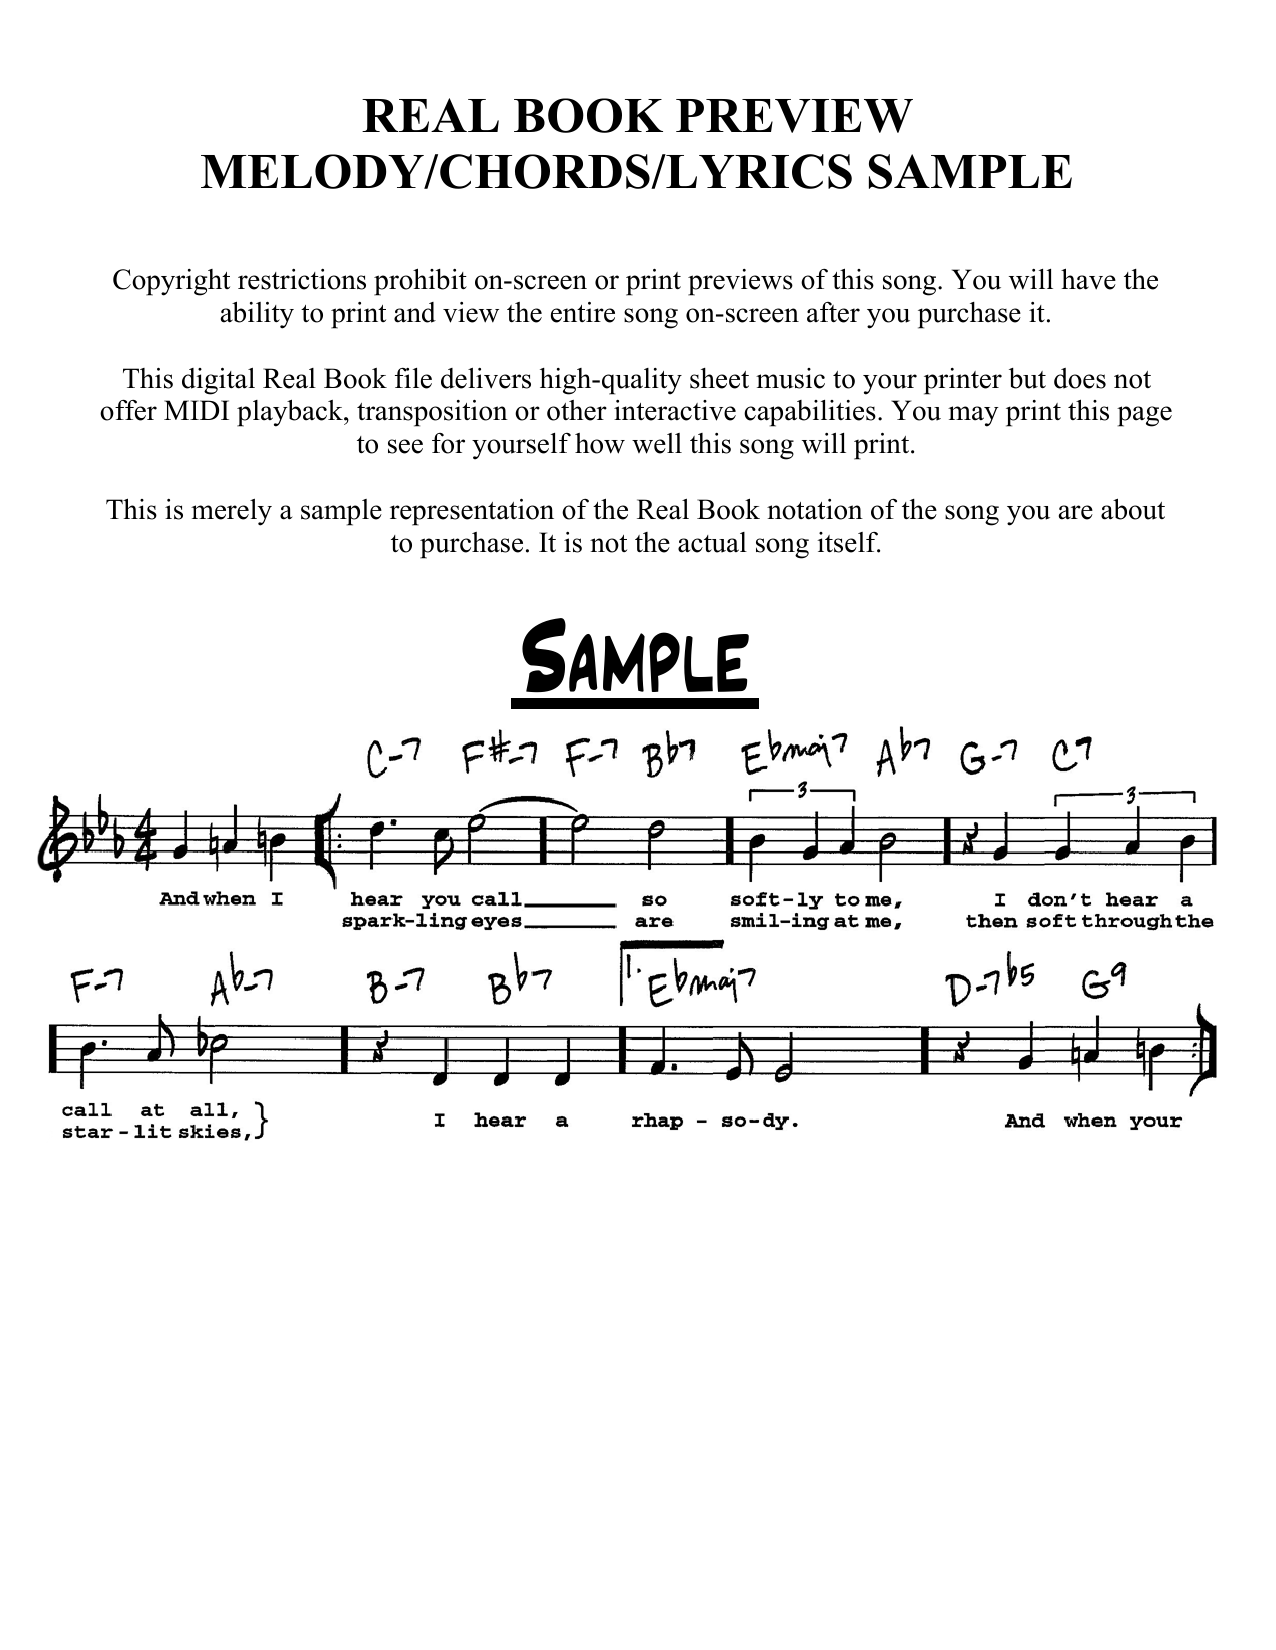 Carmen Lundy Happy New Year sheet music notes and chords. Download Printable PDF.